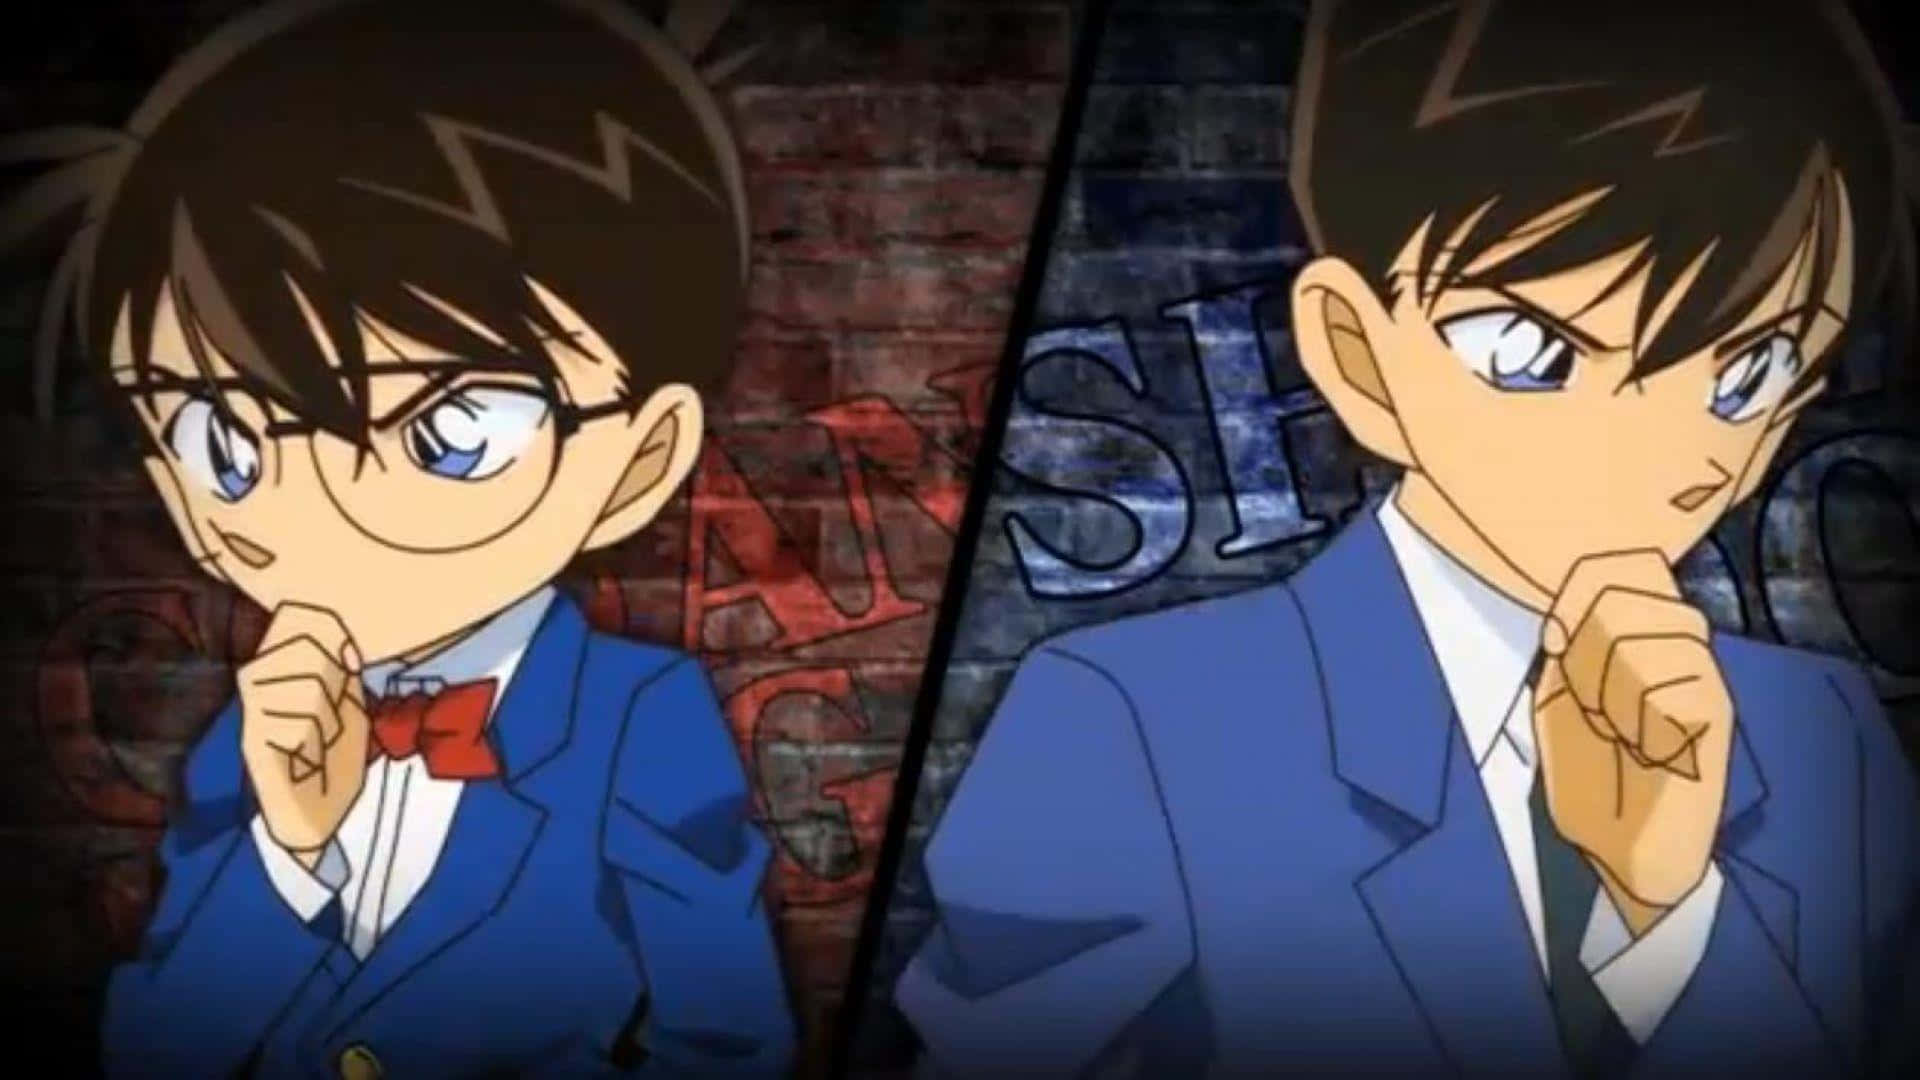 Follow the clues and solve the case with Detective Conan